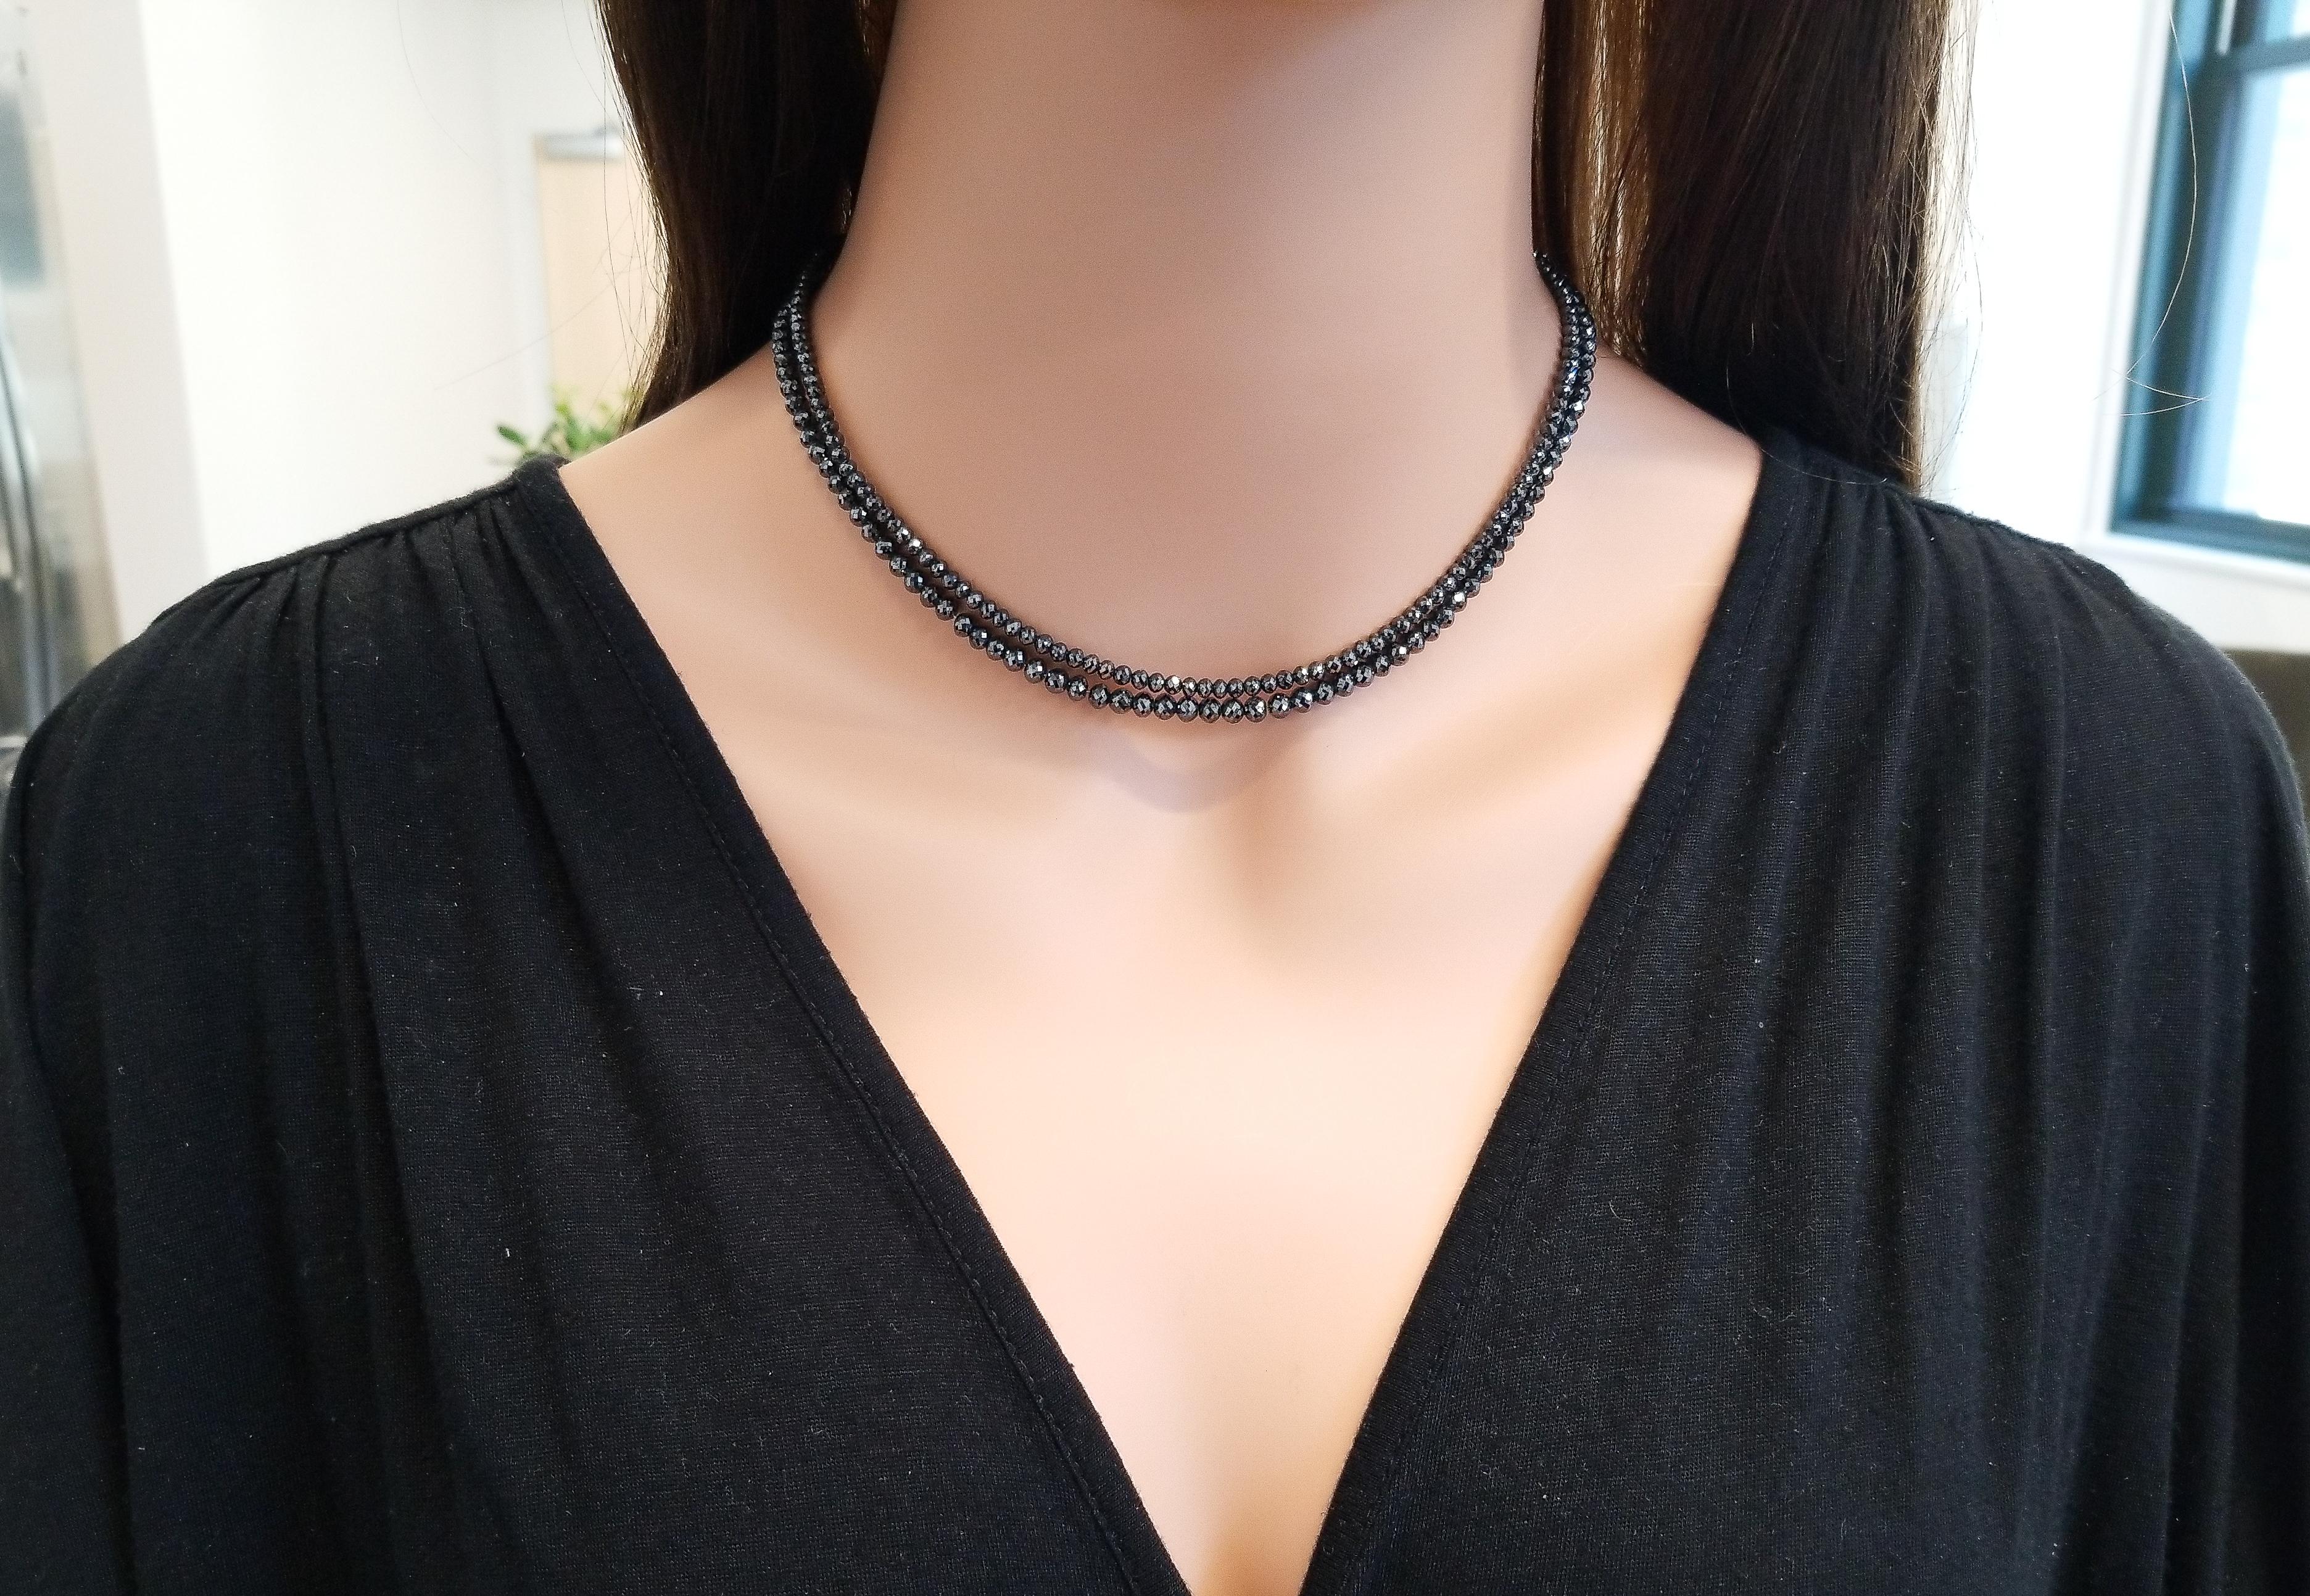 This 87.00 carat double strand, layering necklace is styling and features a grand total of 87 faceted briolette diamonds in two different lengths. These shimmering black diamonds are arranged with the largest beads on the outer layer allowing them